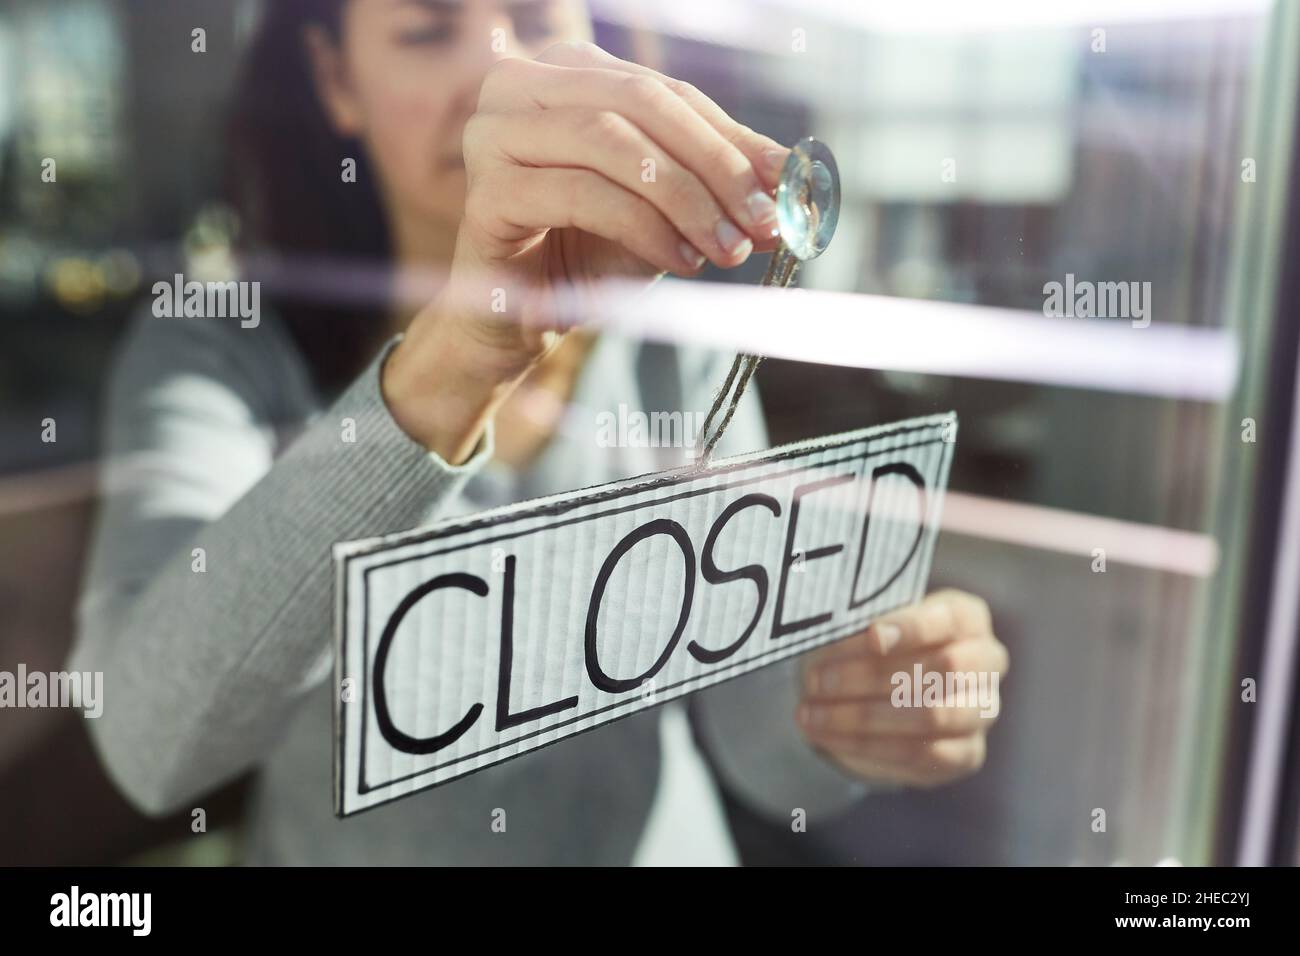 woman hanging banner with closed word on door Stock Photo